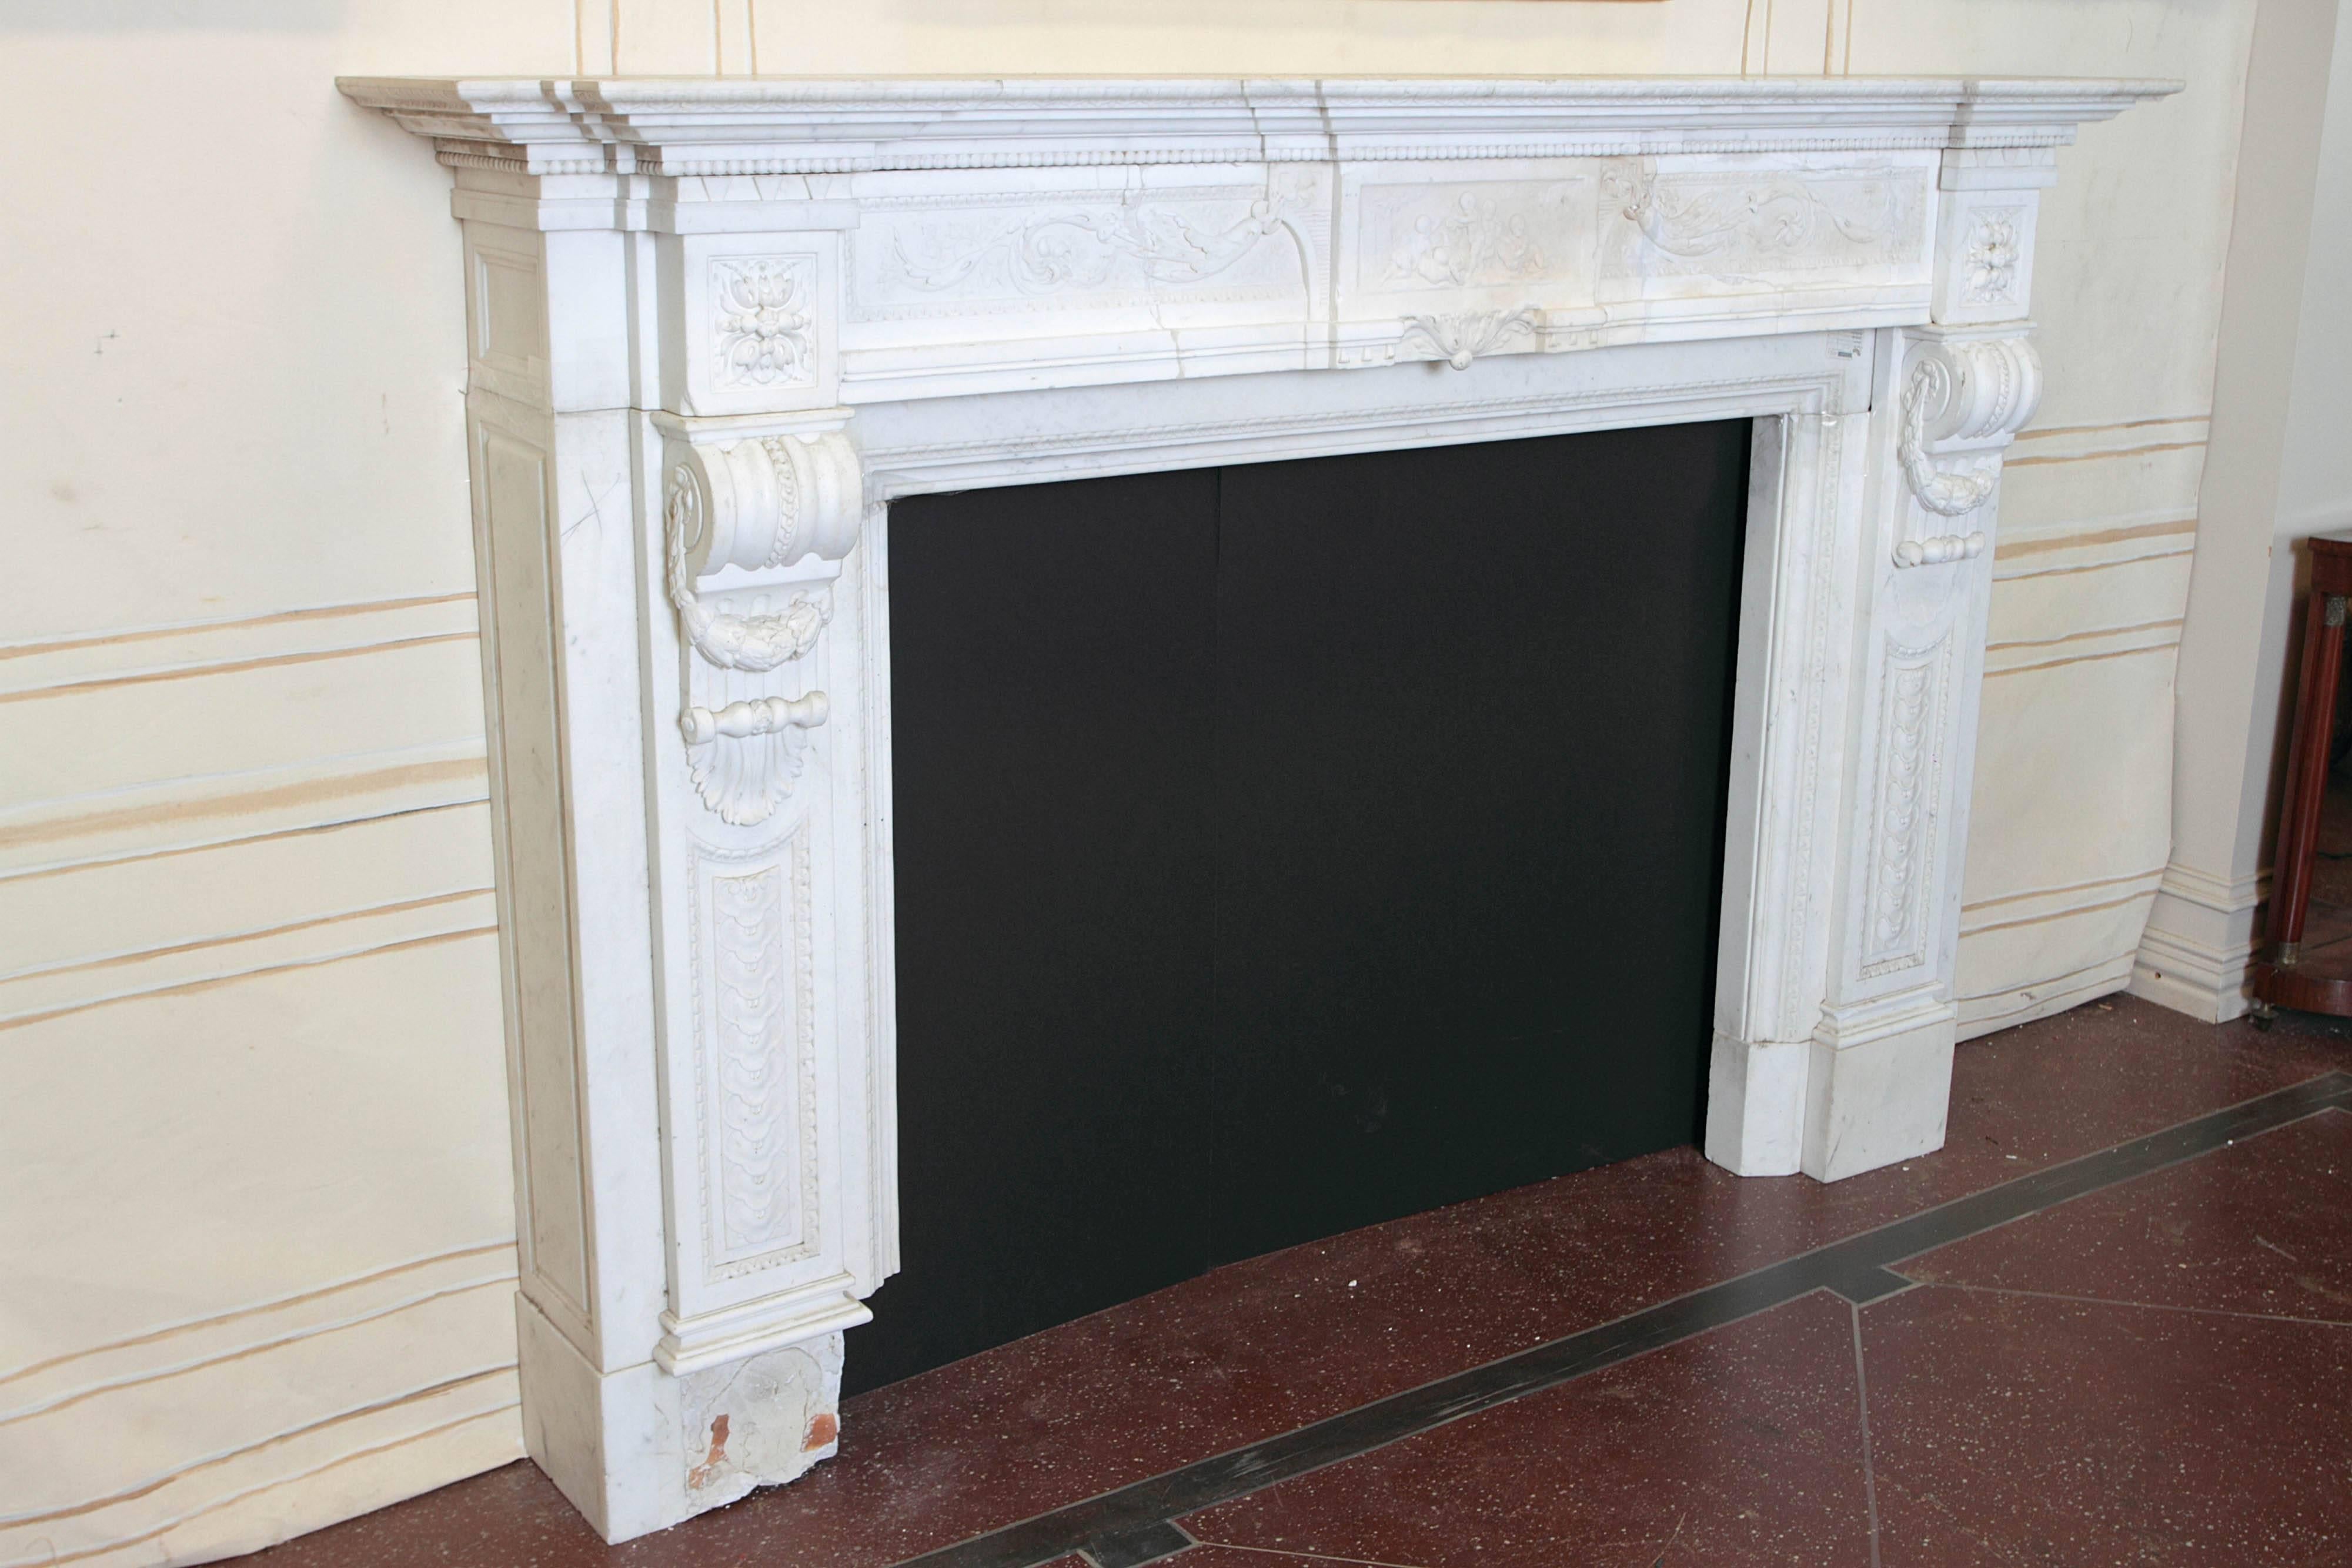 Late 18th century white marble Louis XVI mantel. Ornate relief carving on frieze.